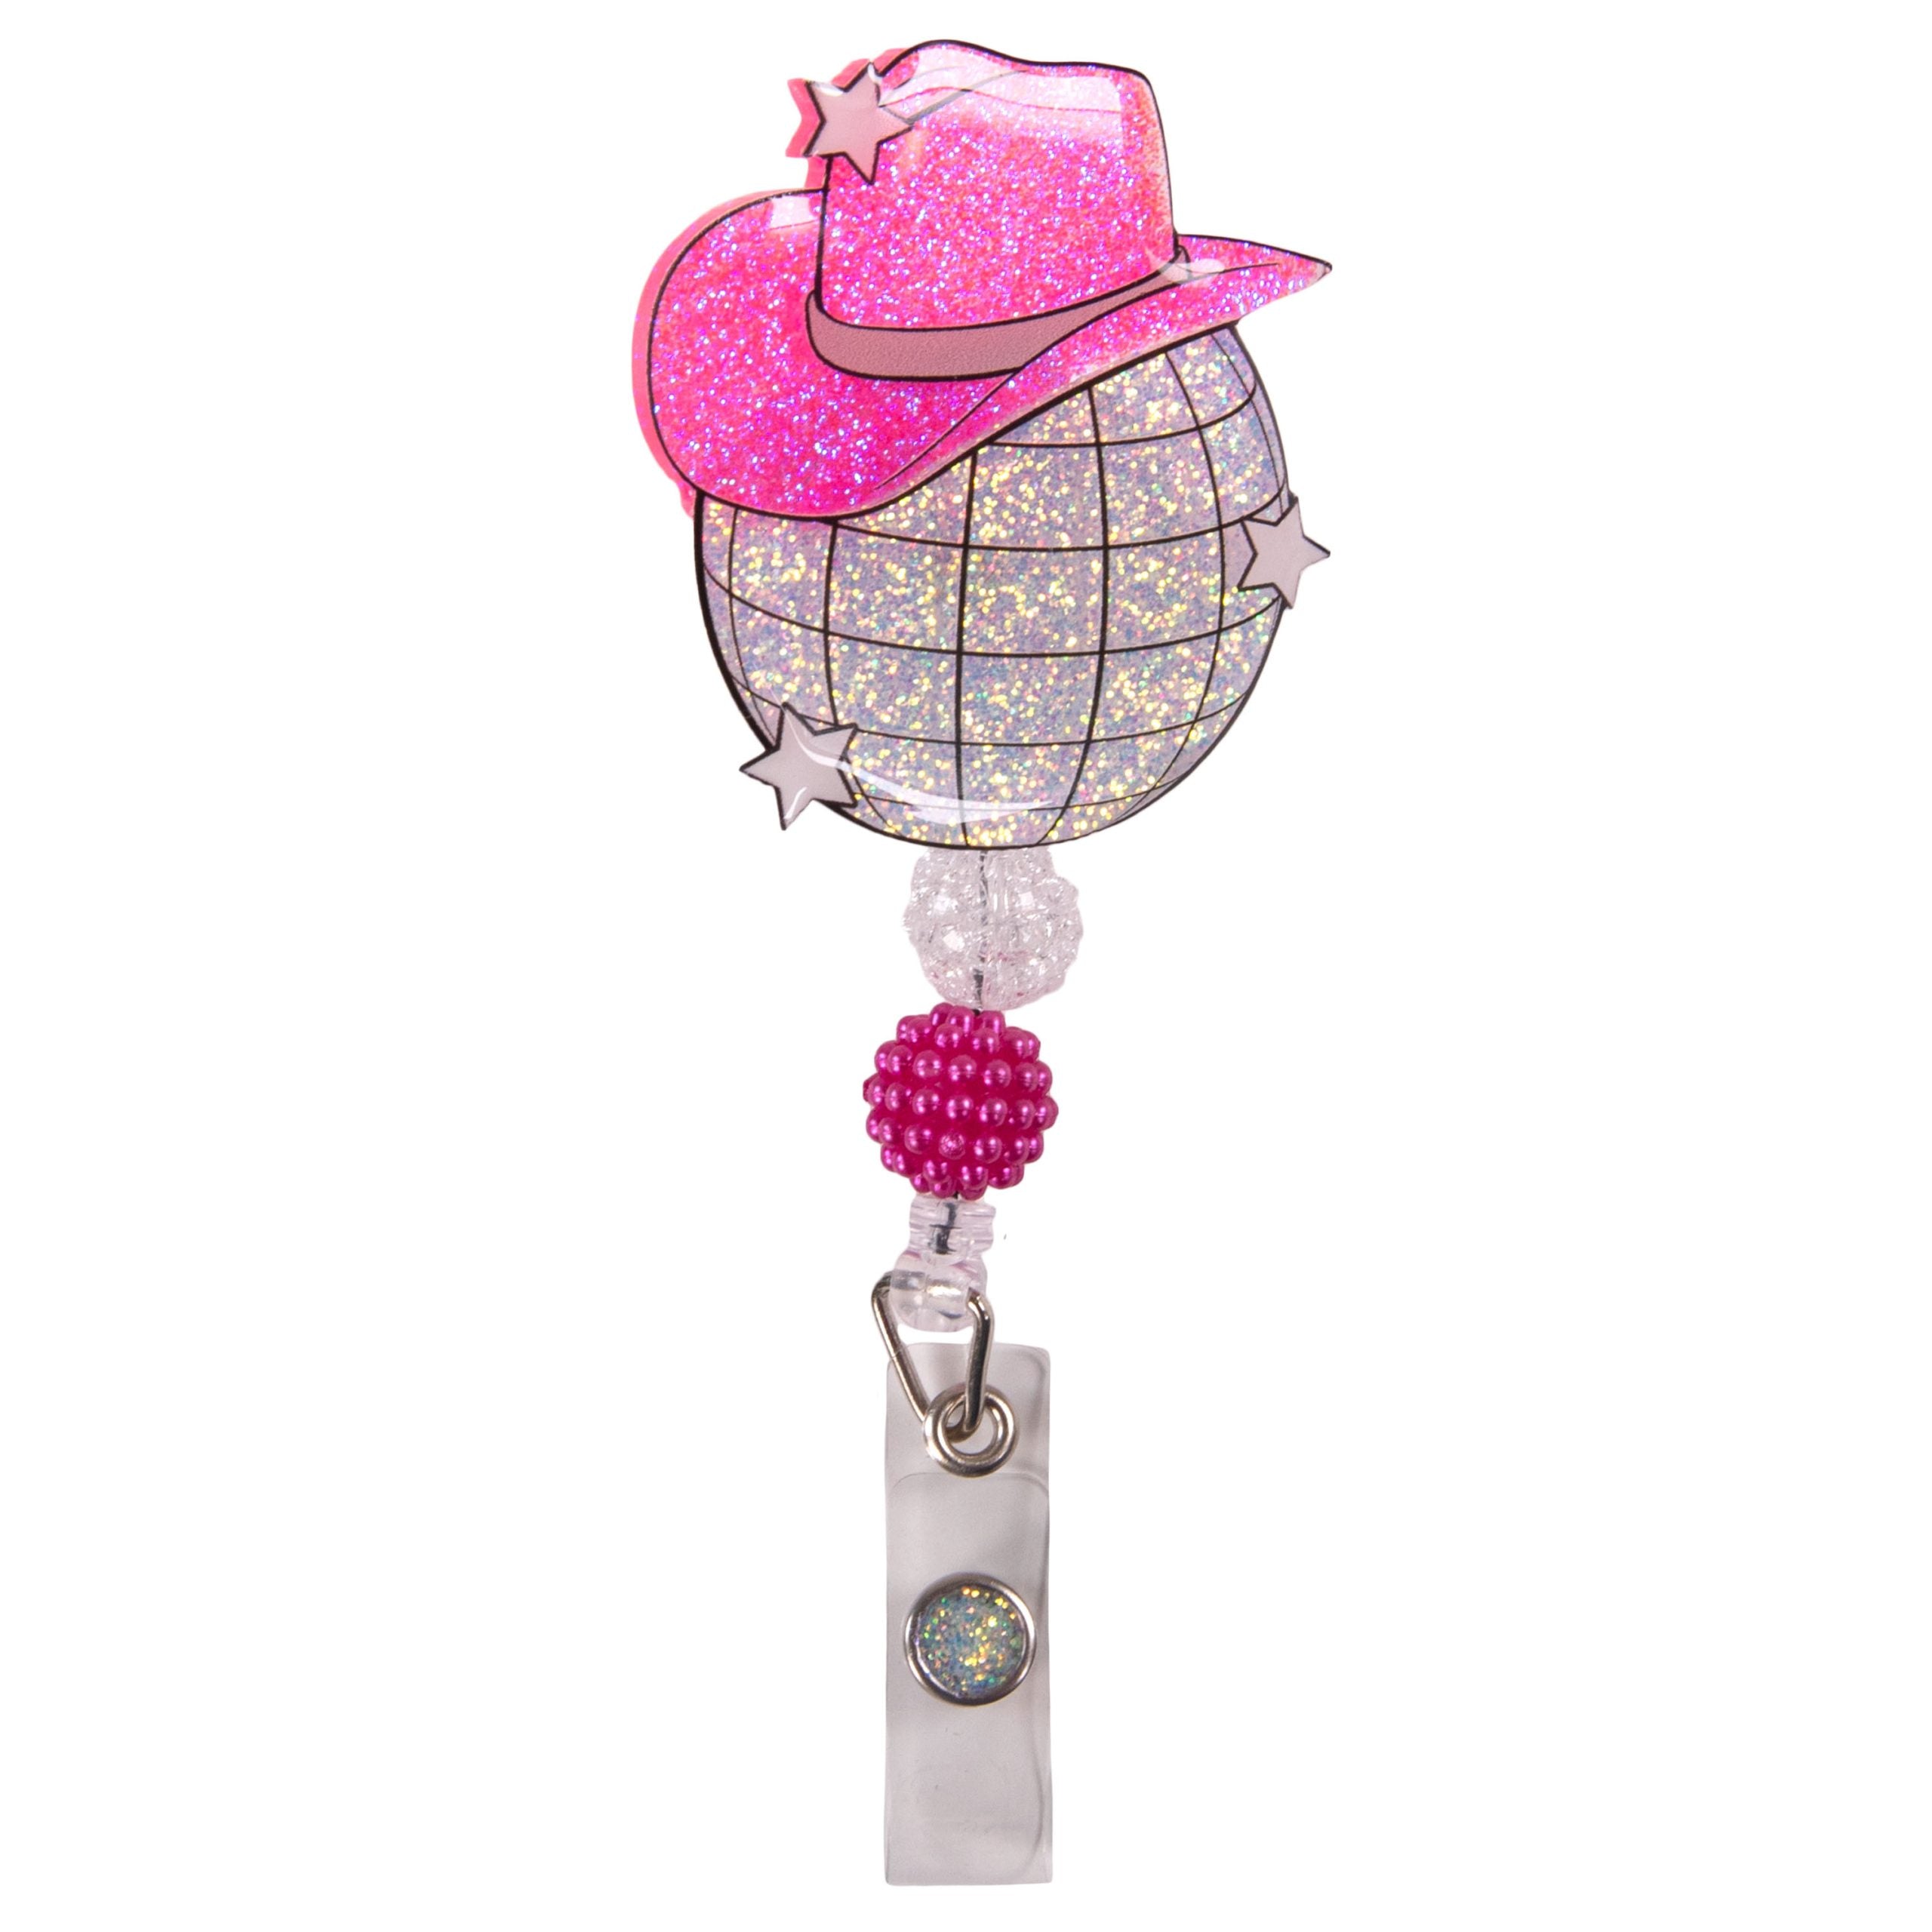 New Badge Reels by Simply Southern have arrived! #supercute